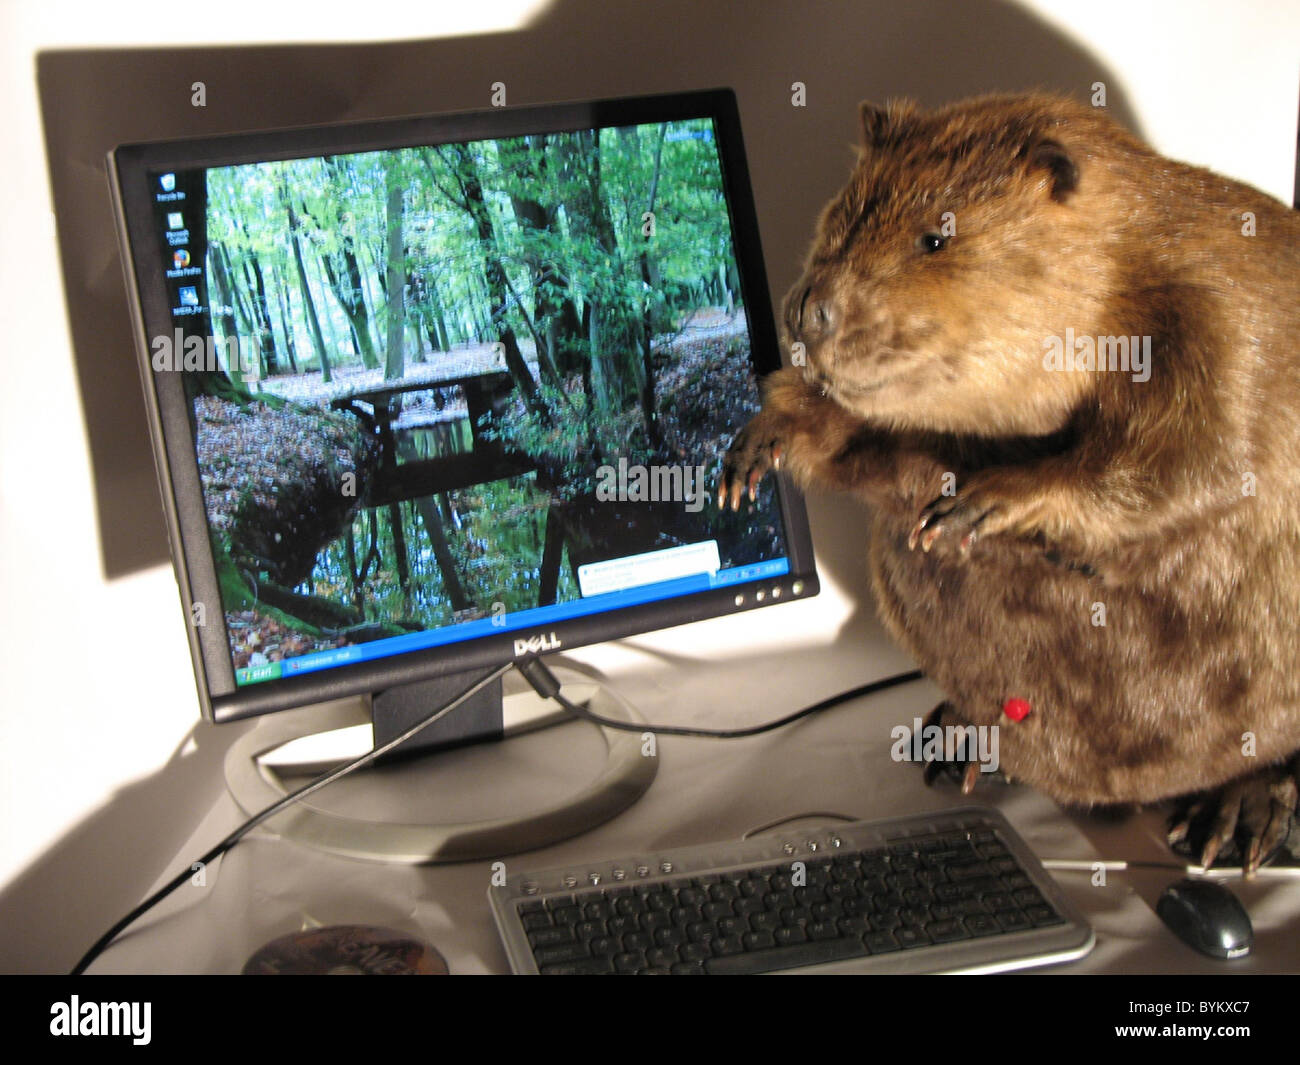 The Compubeaver! The worlds of IT and taxidermy collide with this  compubeaver - a computer stuffed inside a dead beaver. While Stock Photo -  Alamy